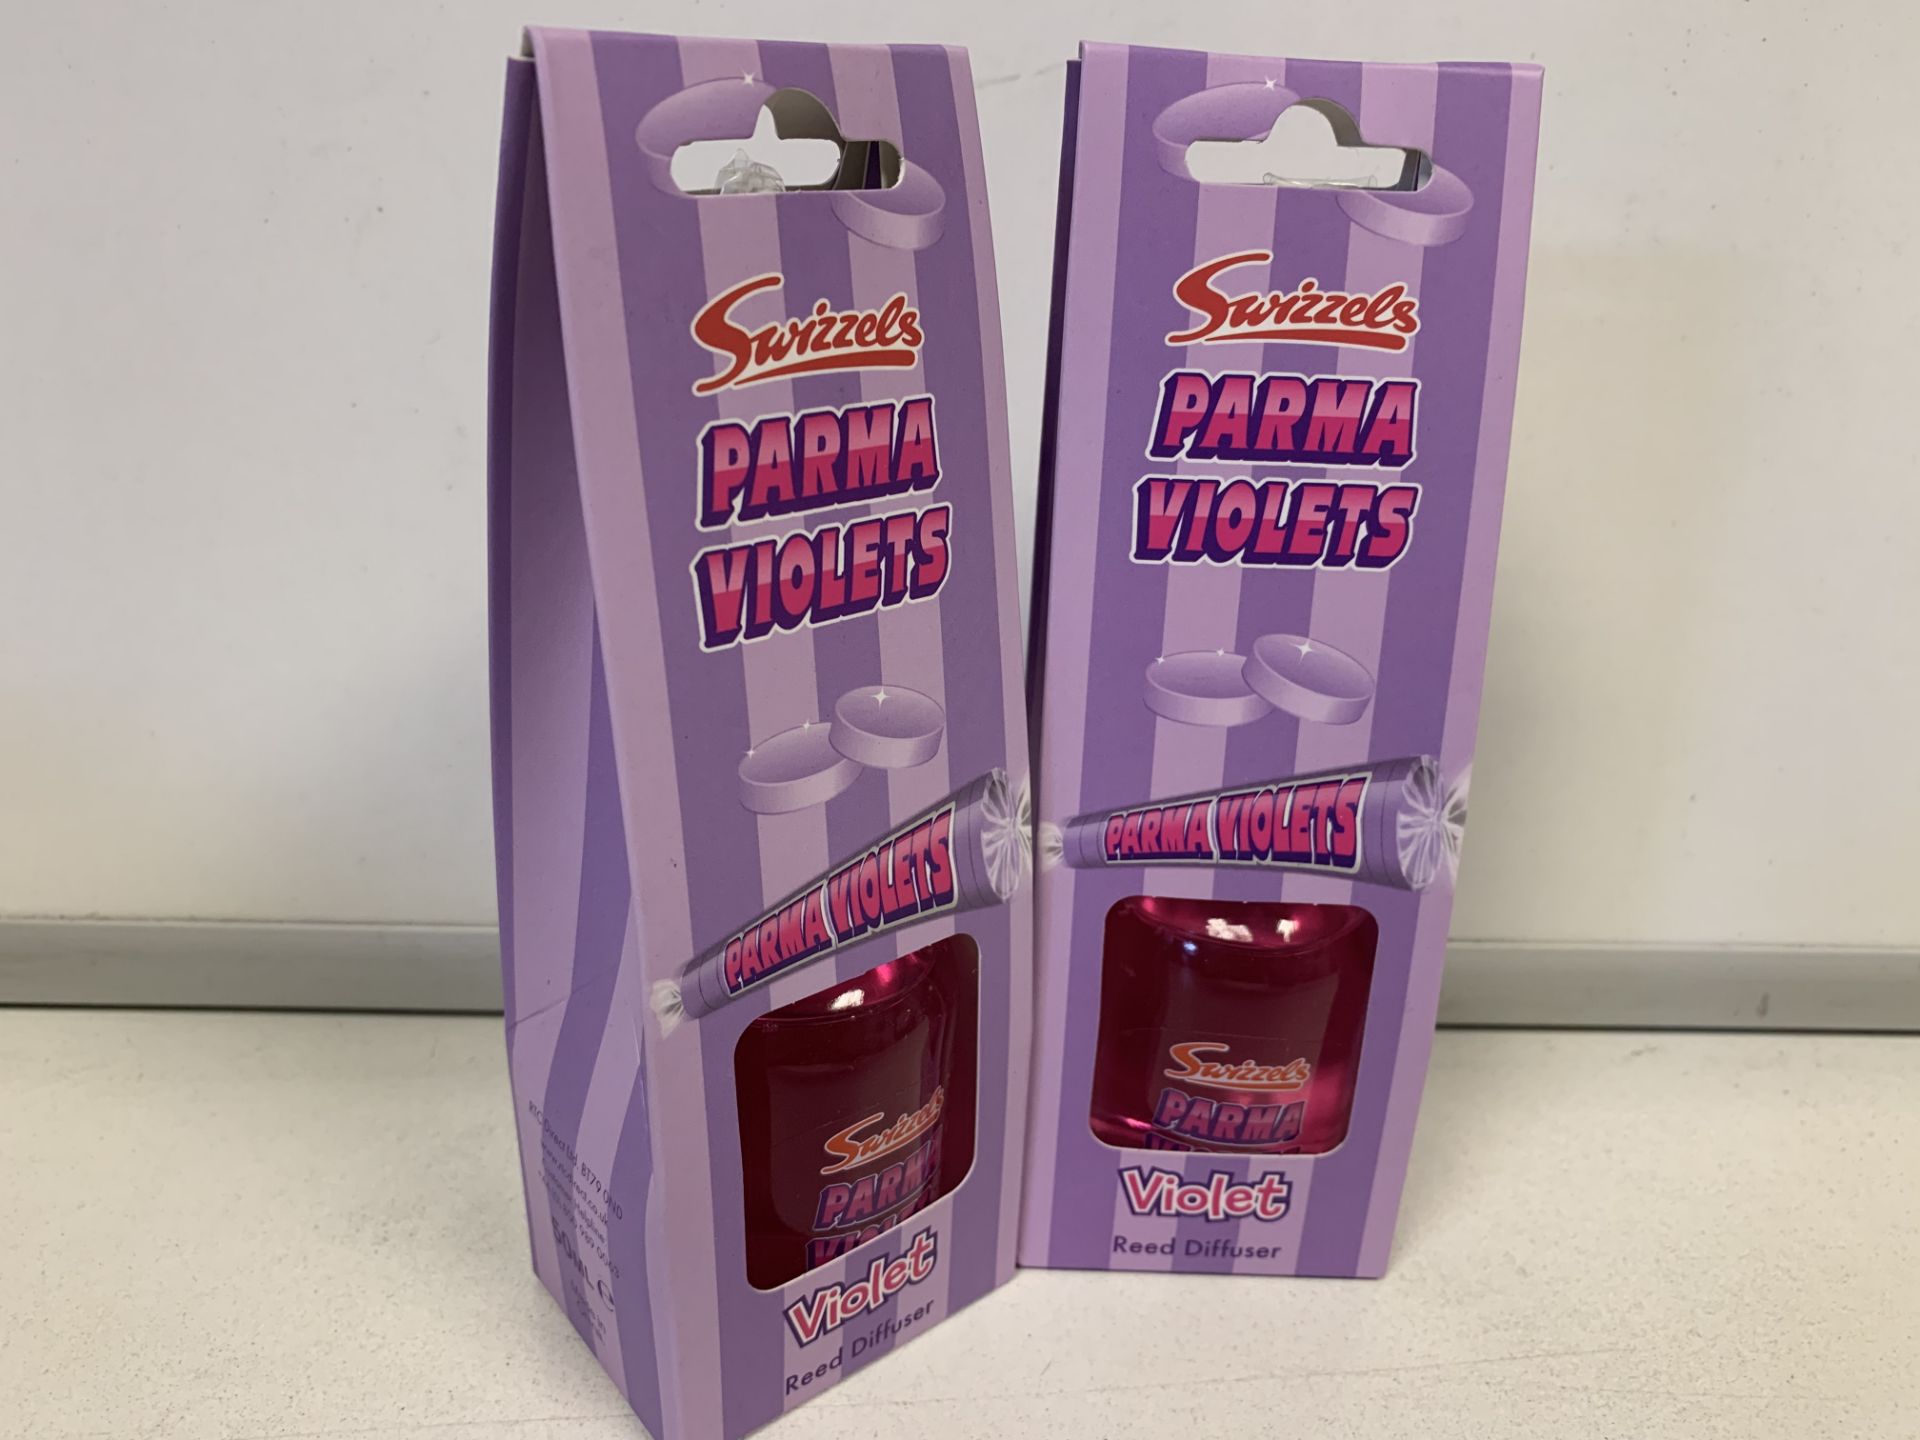 24 X SWIZZELS PARMA VIOLETS REED DIFFUSERS IN 1 BOX